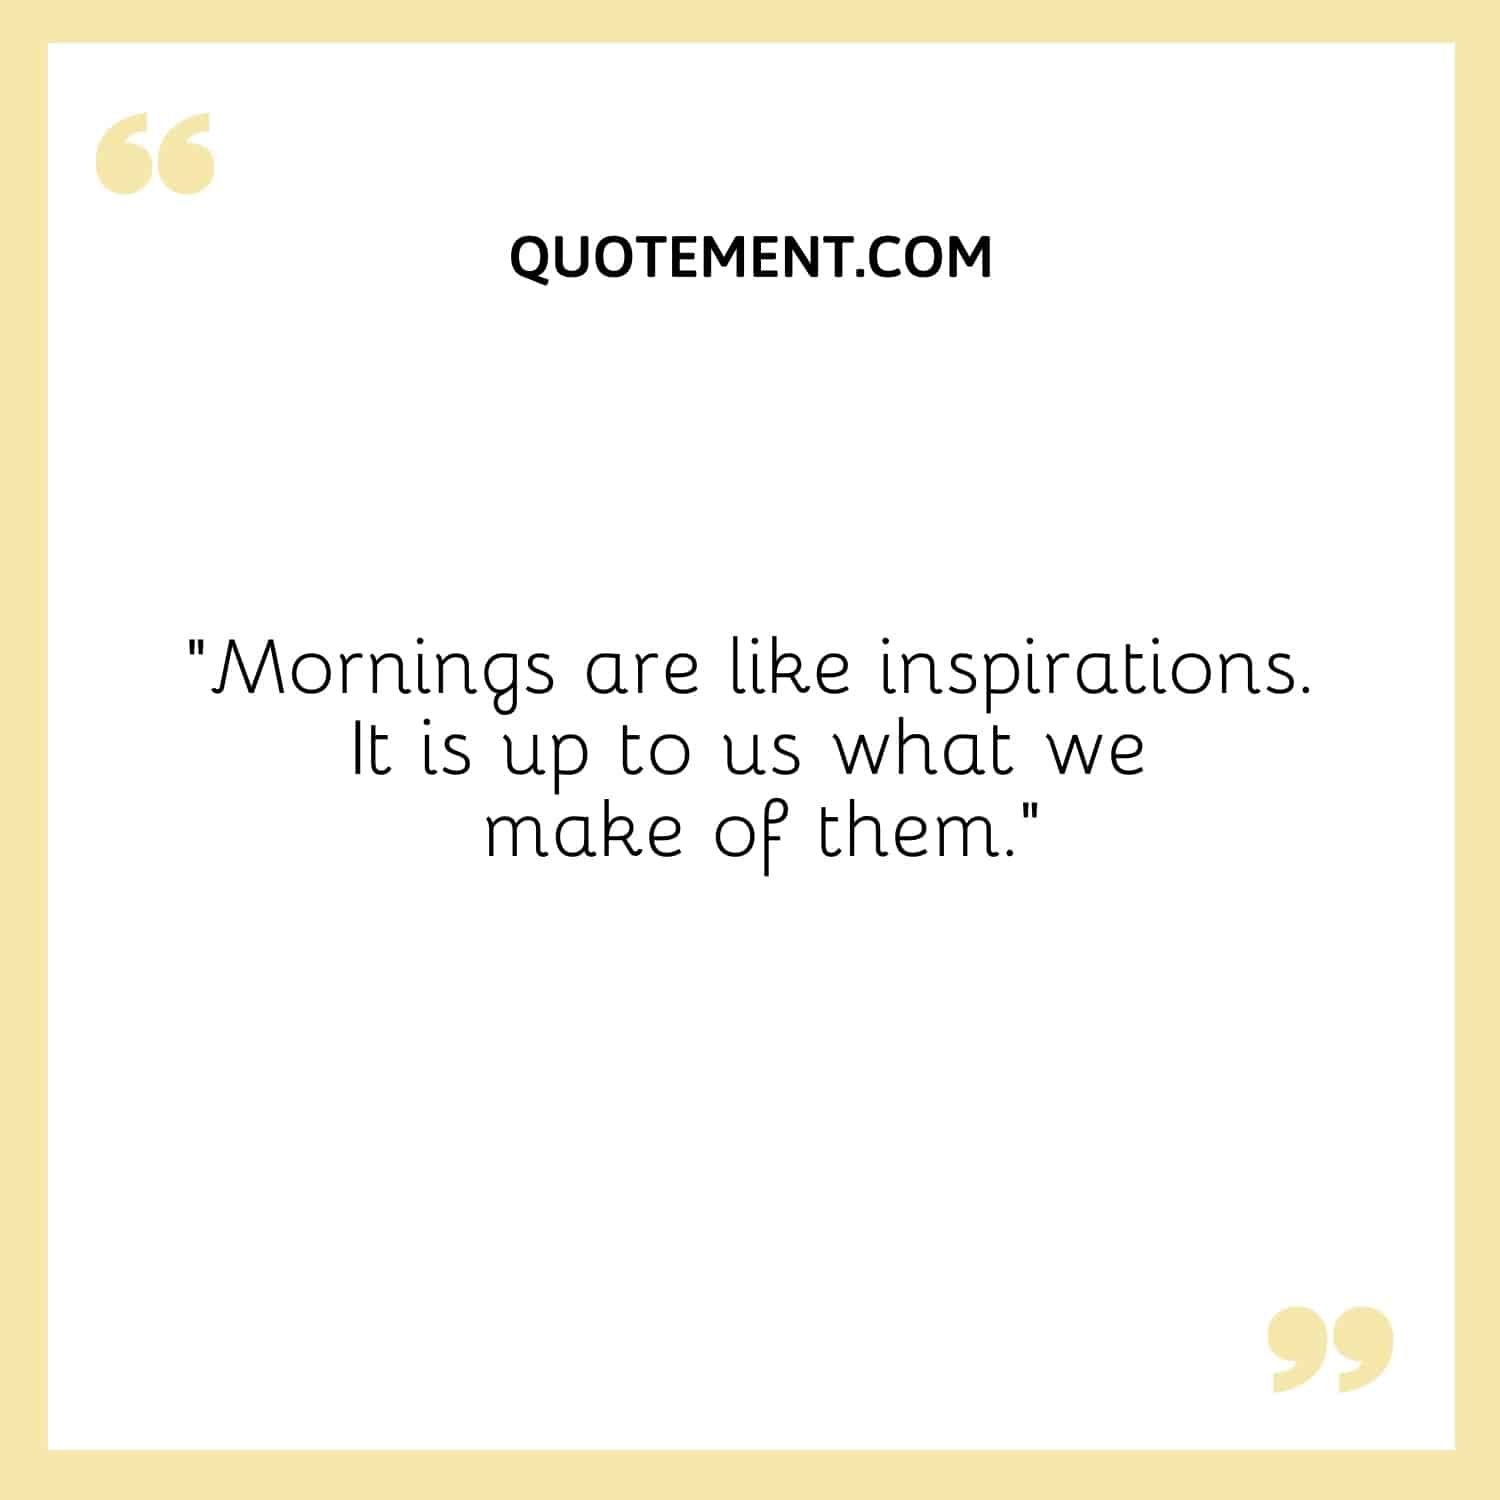 Mornings are like inspirations